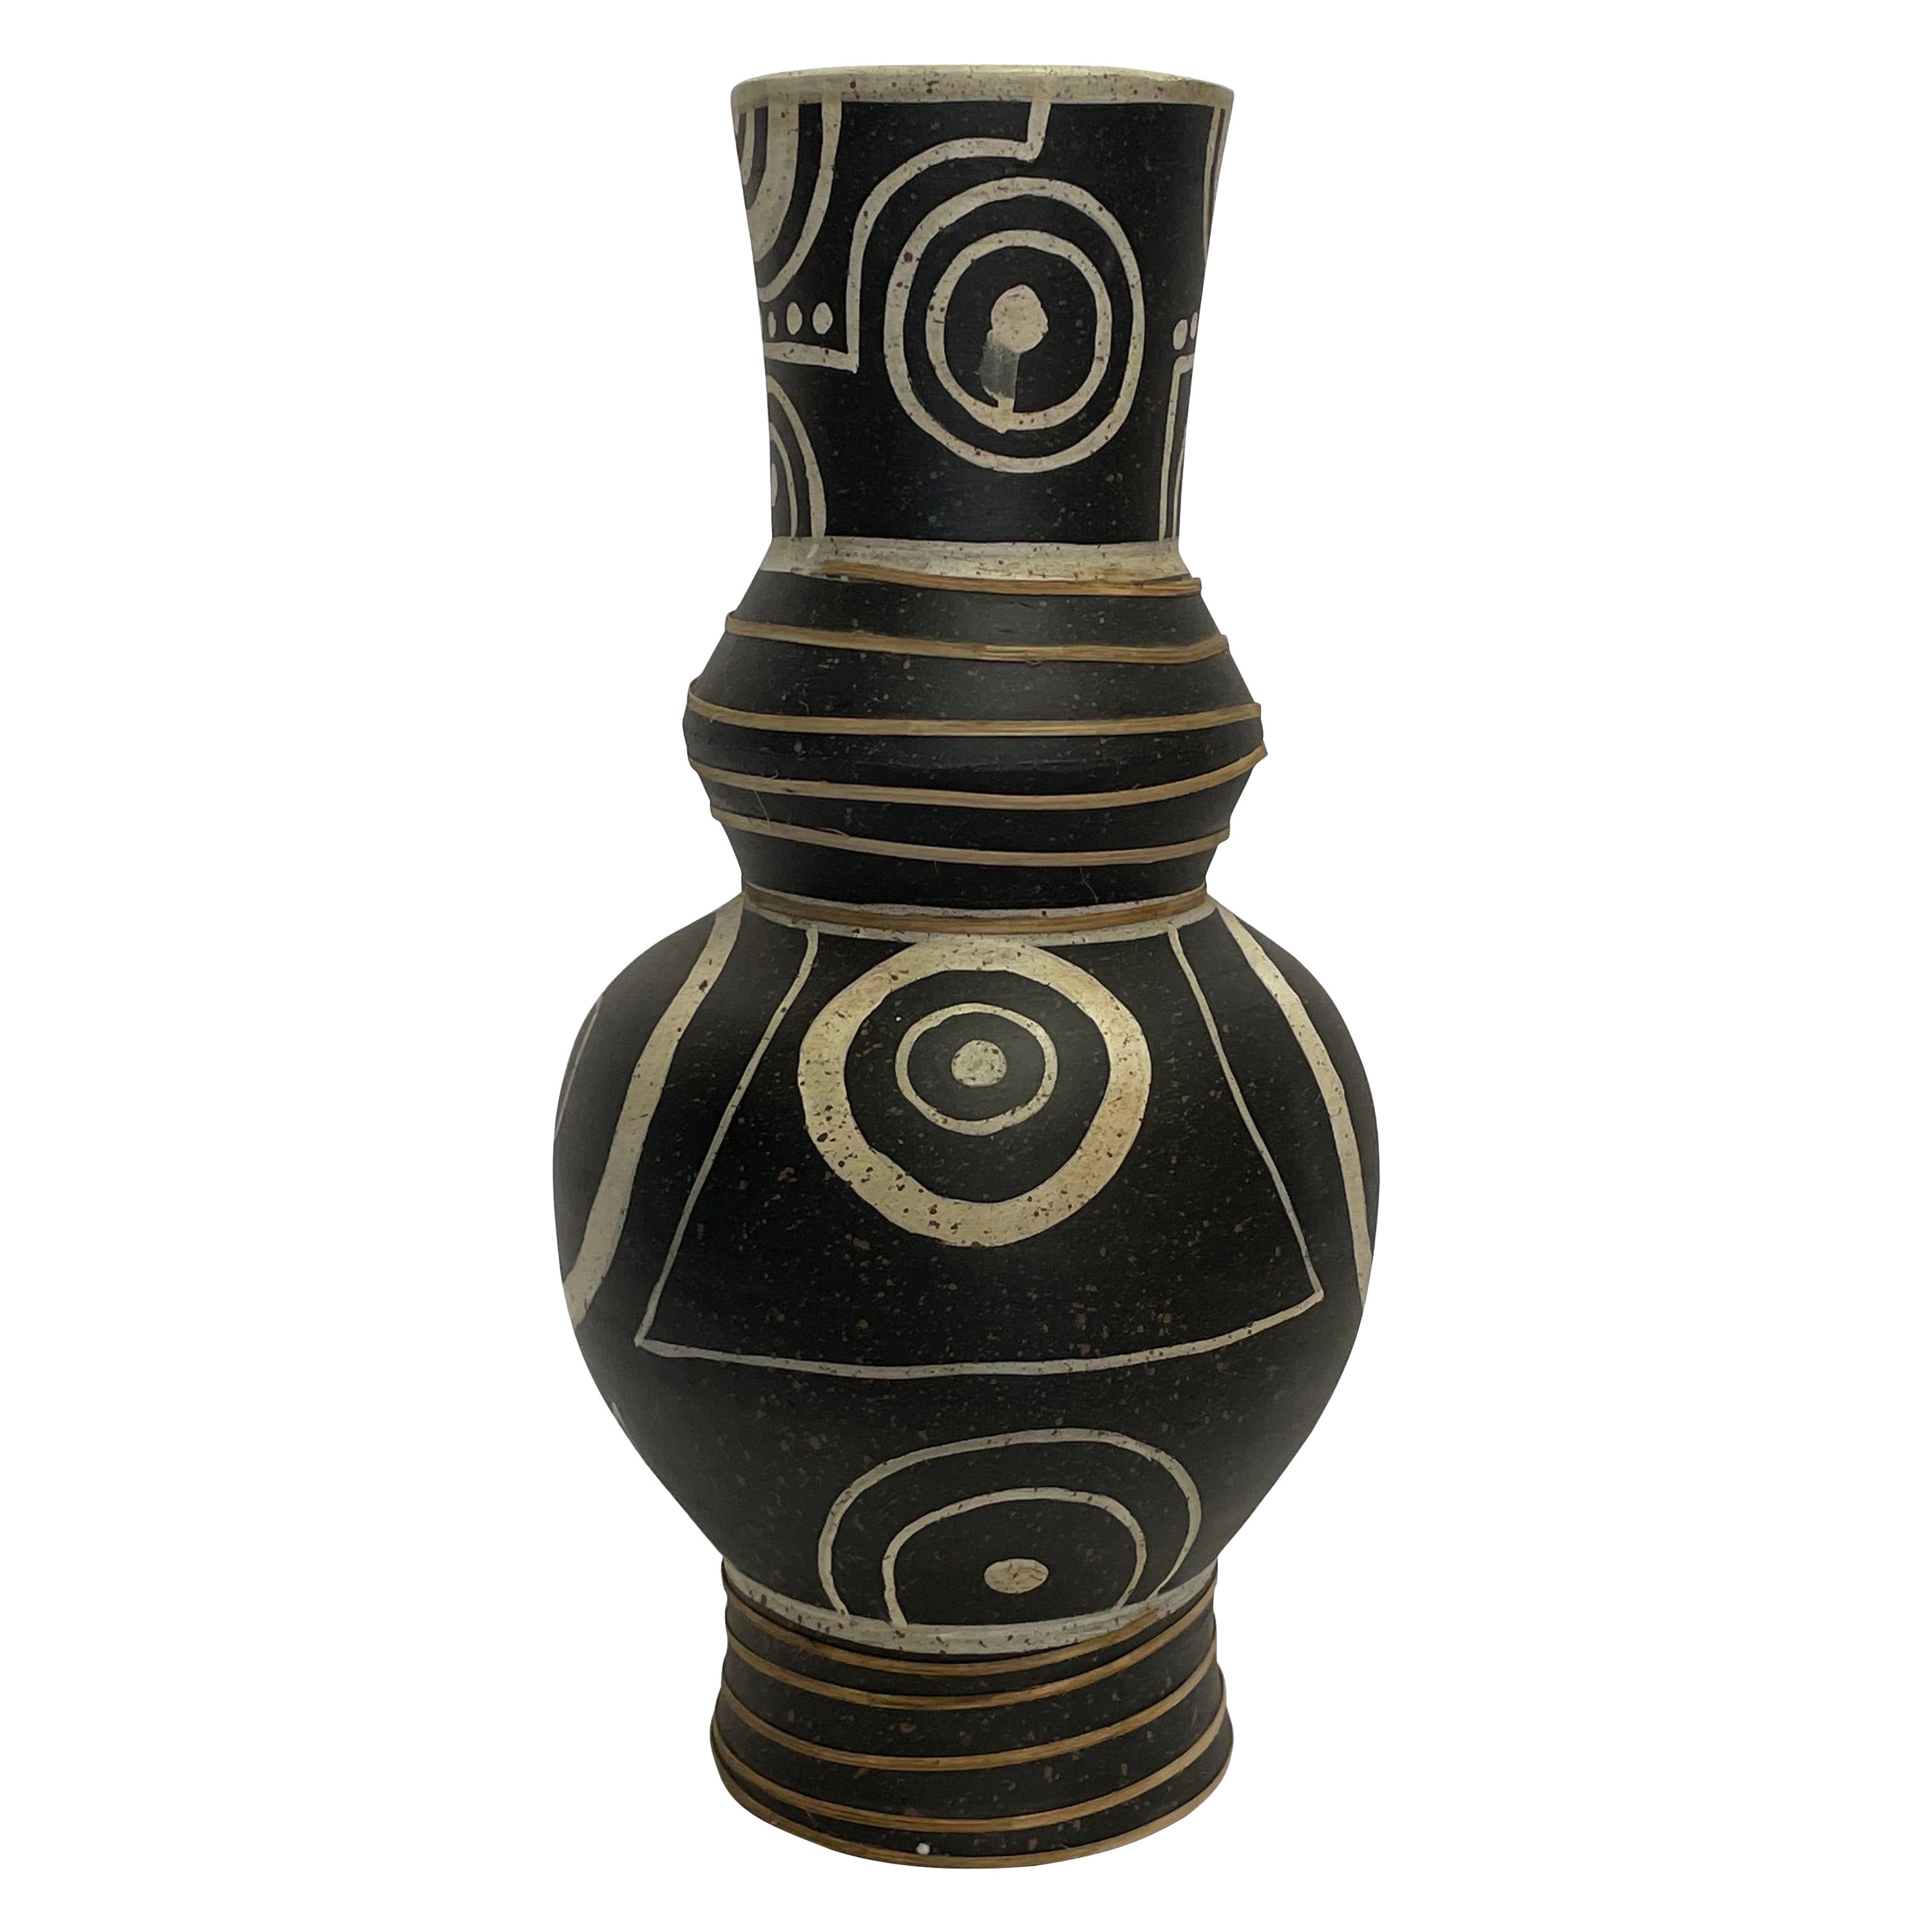 Black and White Decorative Tribal Pattern Vase, China, Contemporary